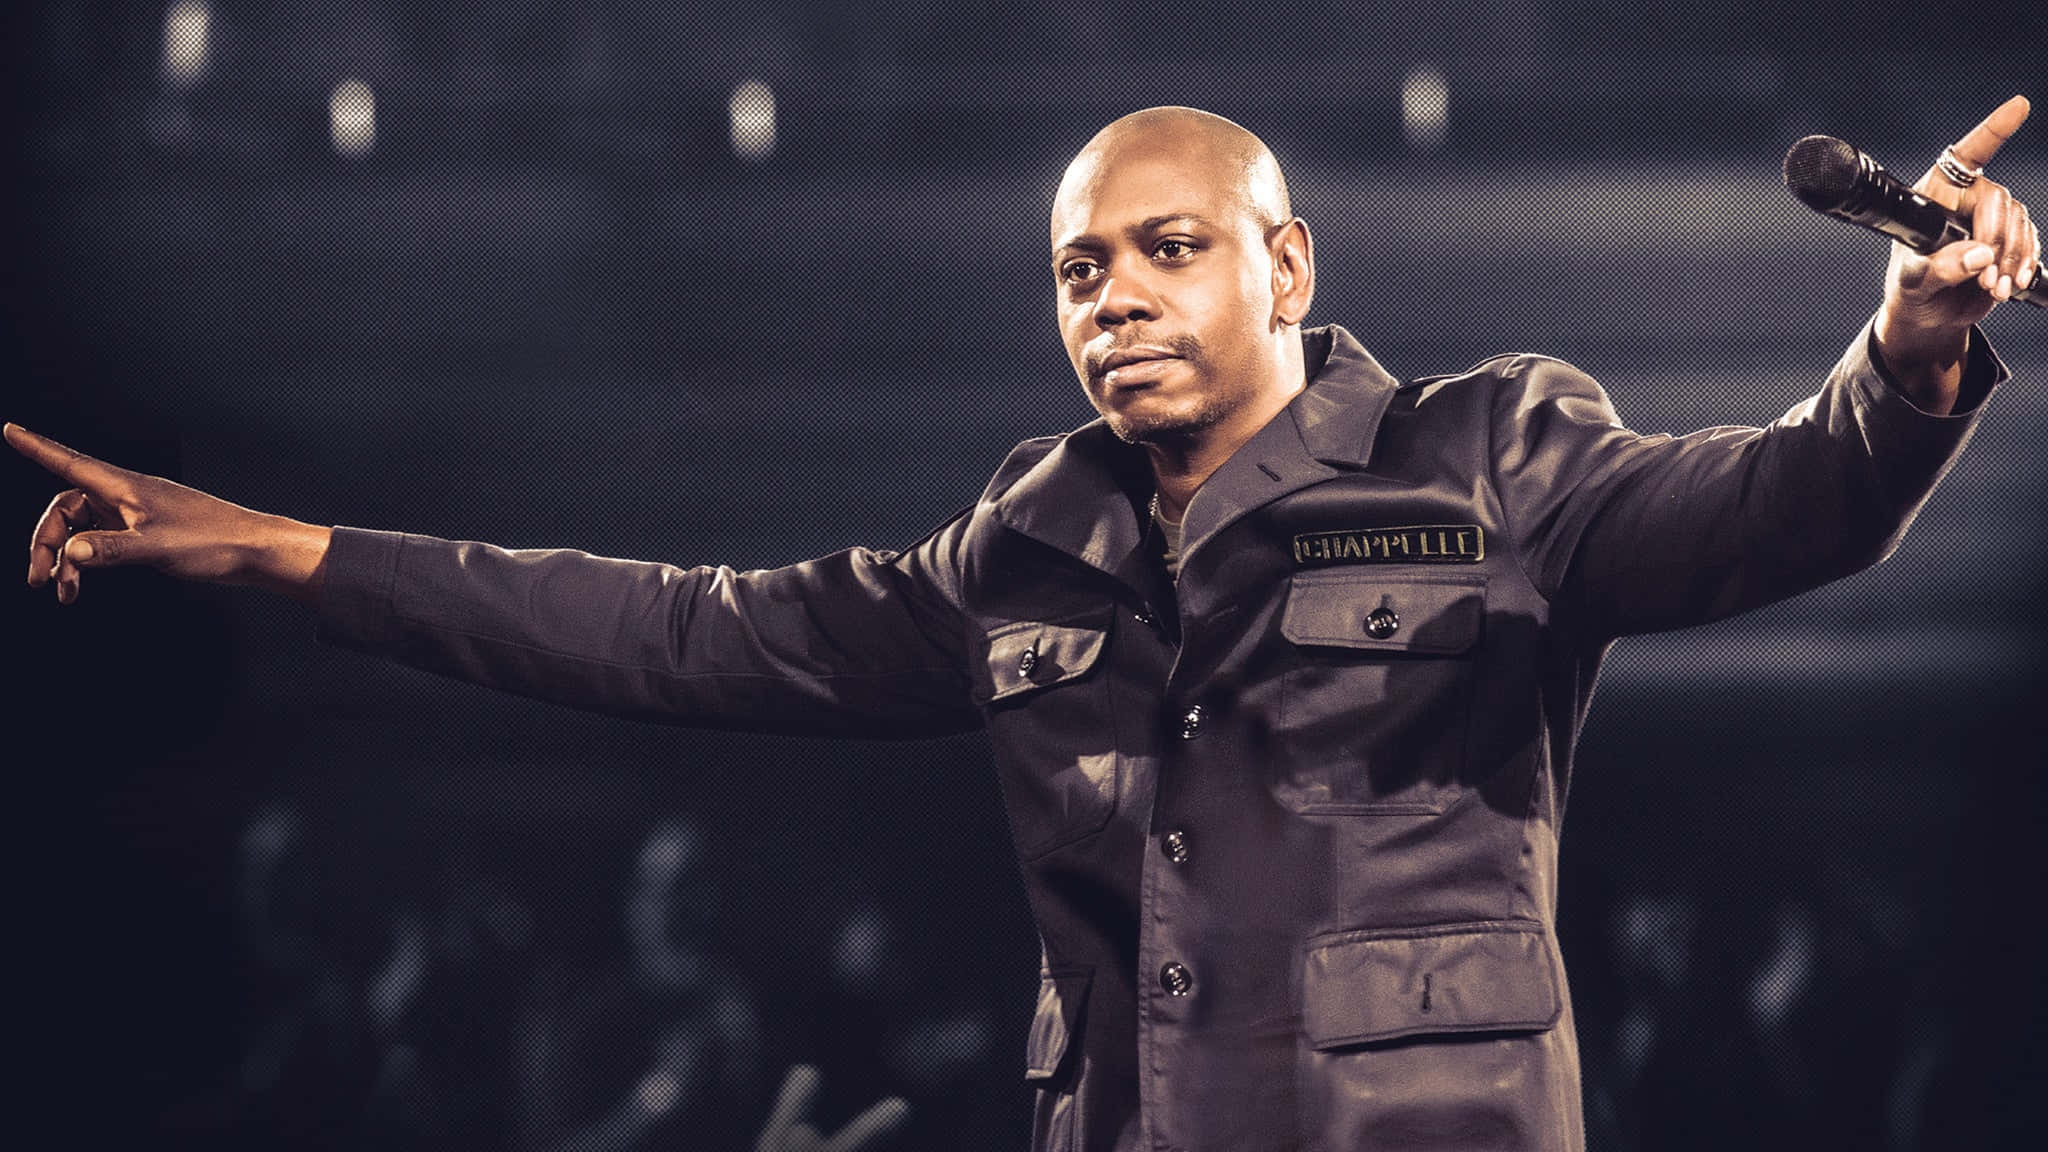 Comedy King Dave Chappelle Performing Live Background